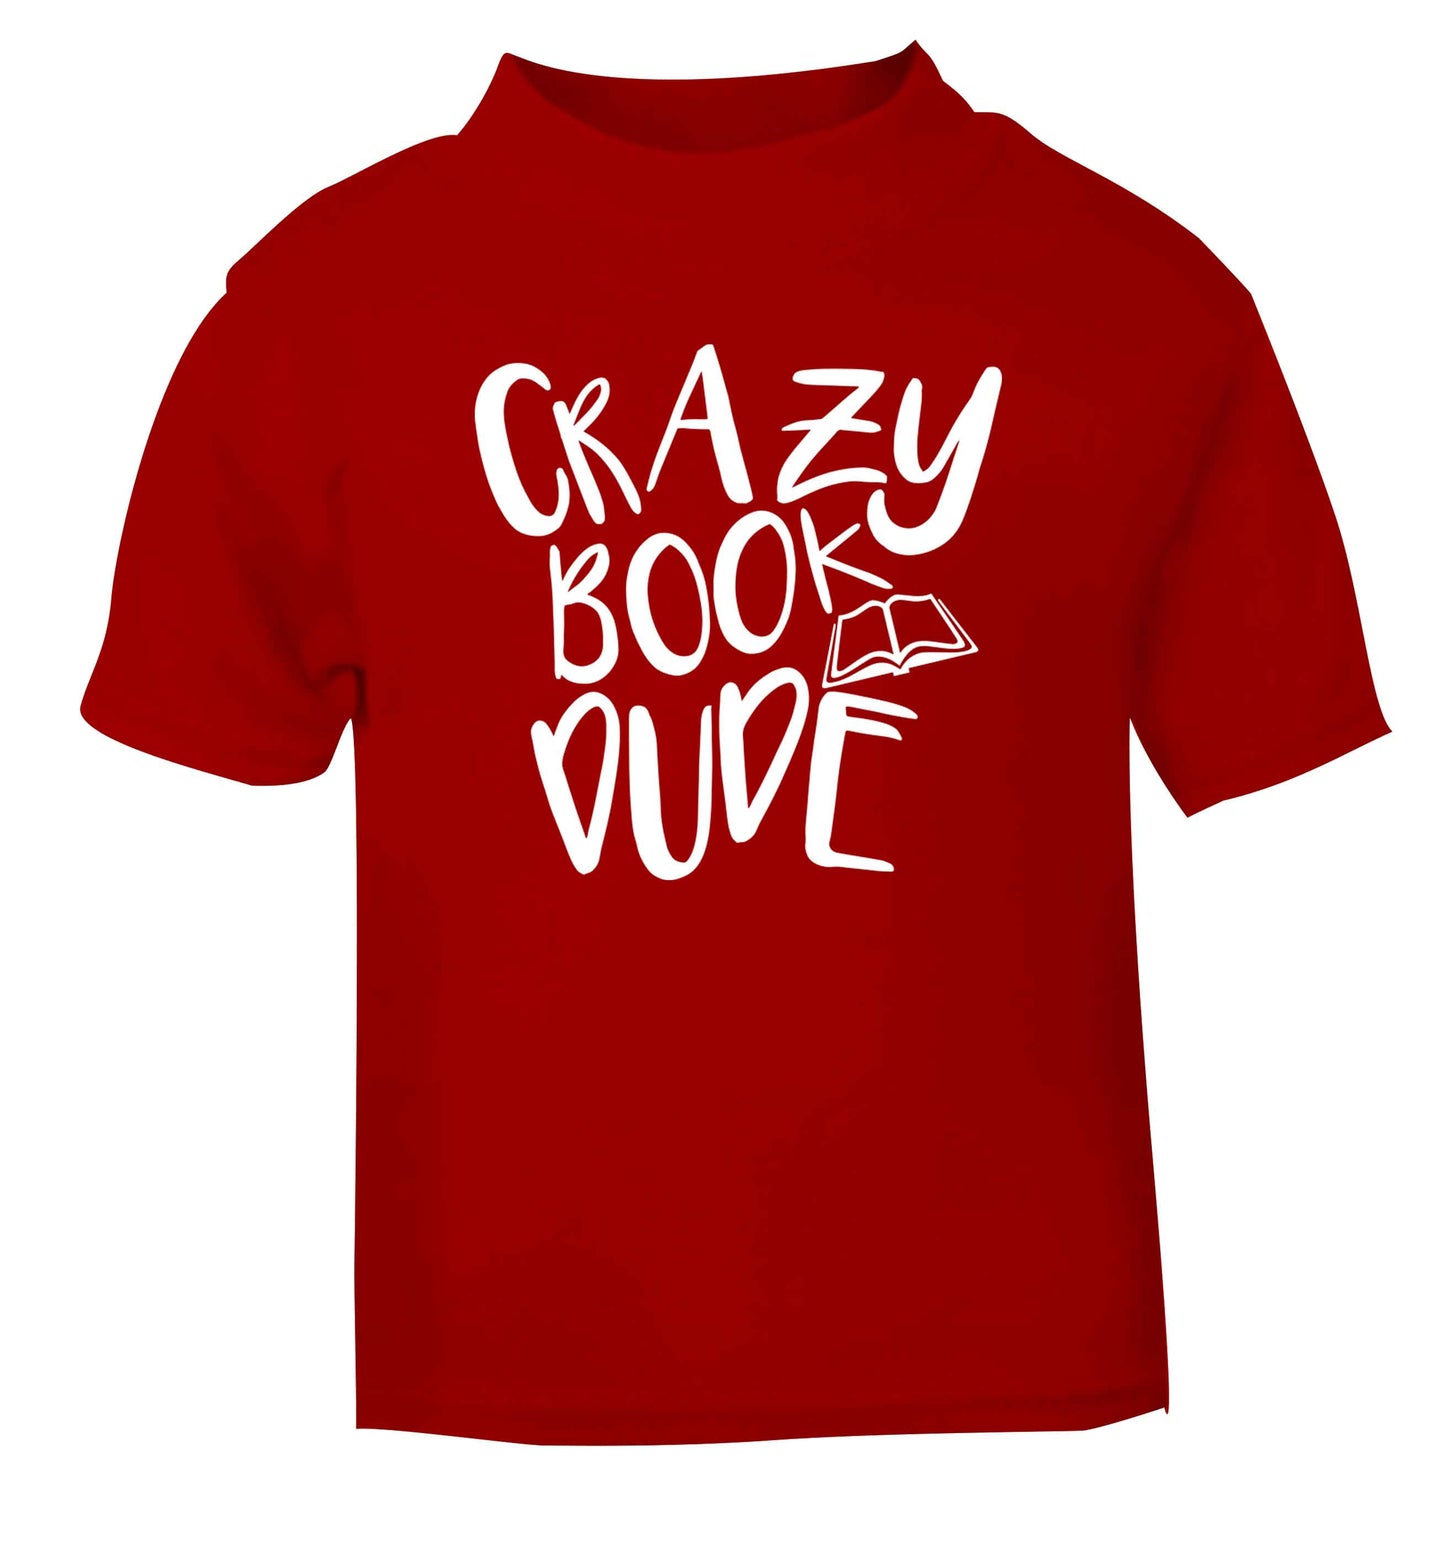 Crazy book dude red Baby Toddler Tshirt 2 Years